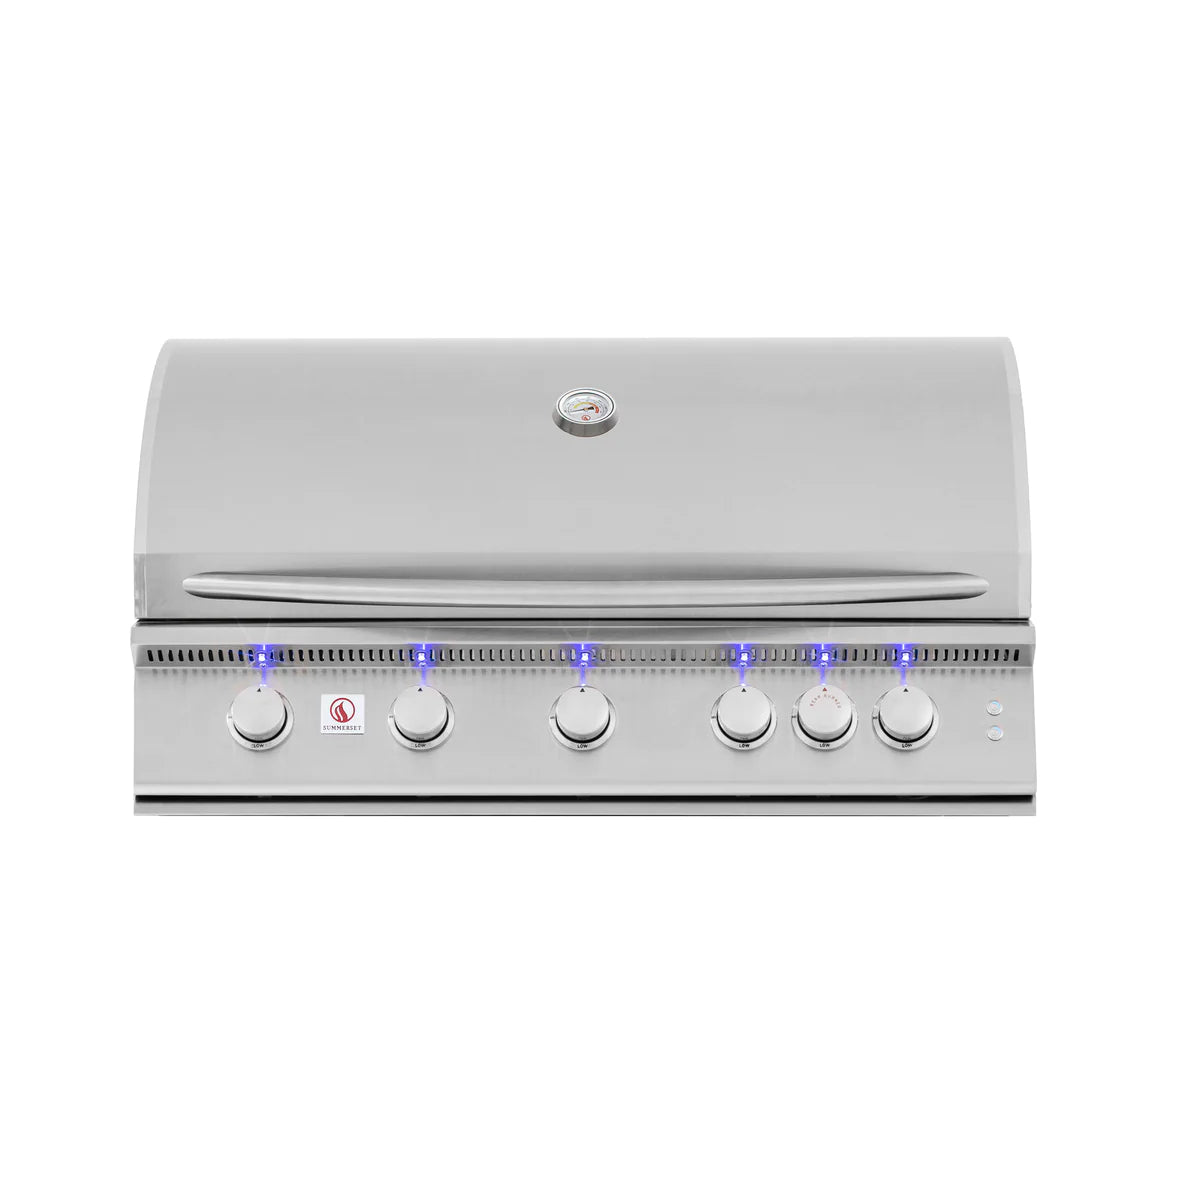 Sizzler Pro 40" Built-in Grill